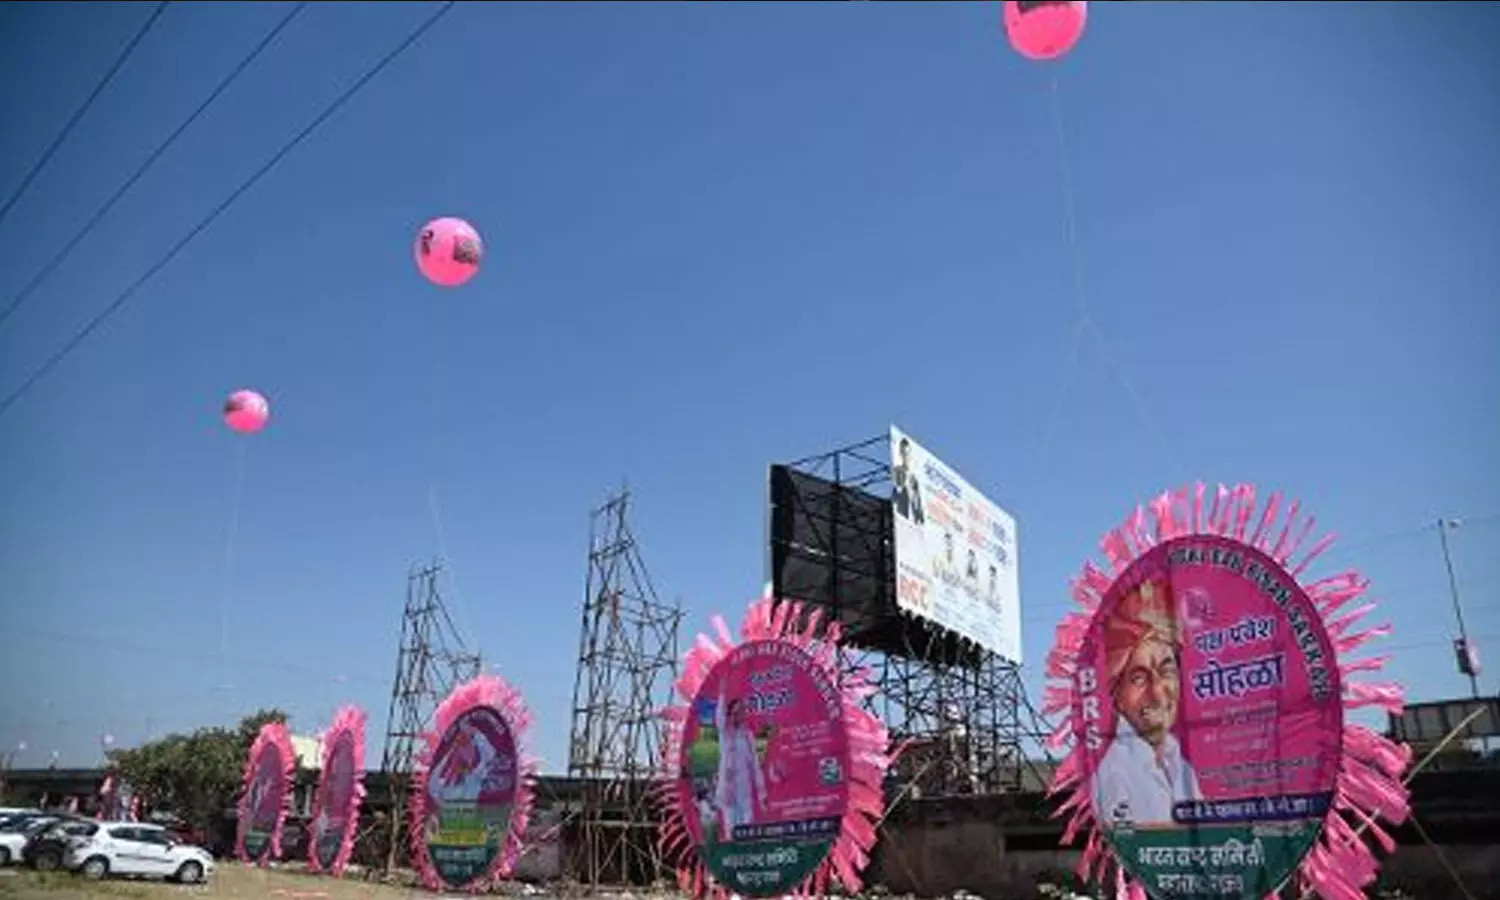 Nanded turns pink for BRS meeting on February 5, Indrakaran Reddy checks arrangements